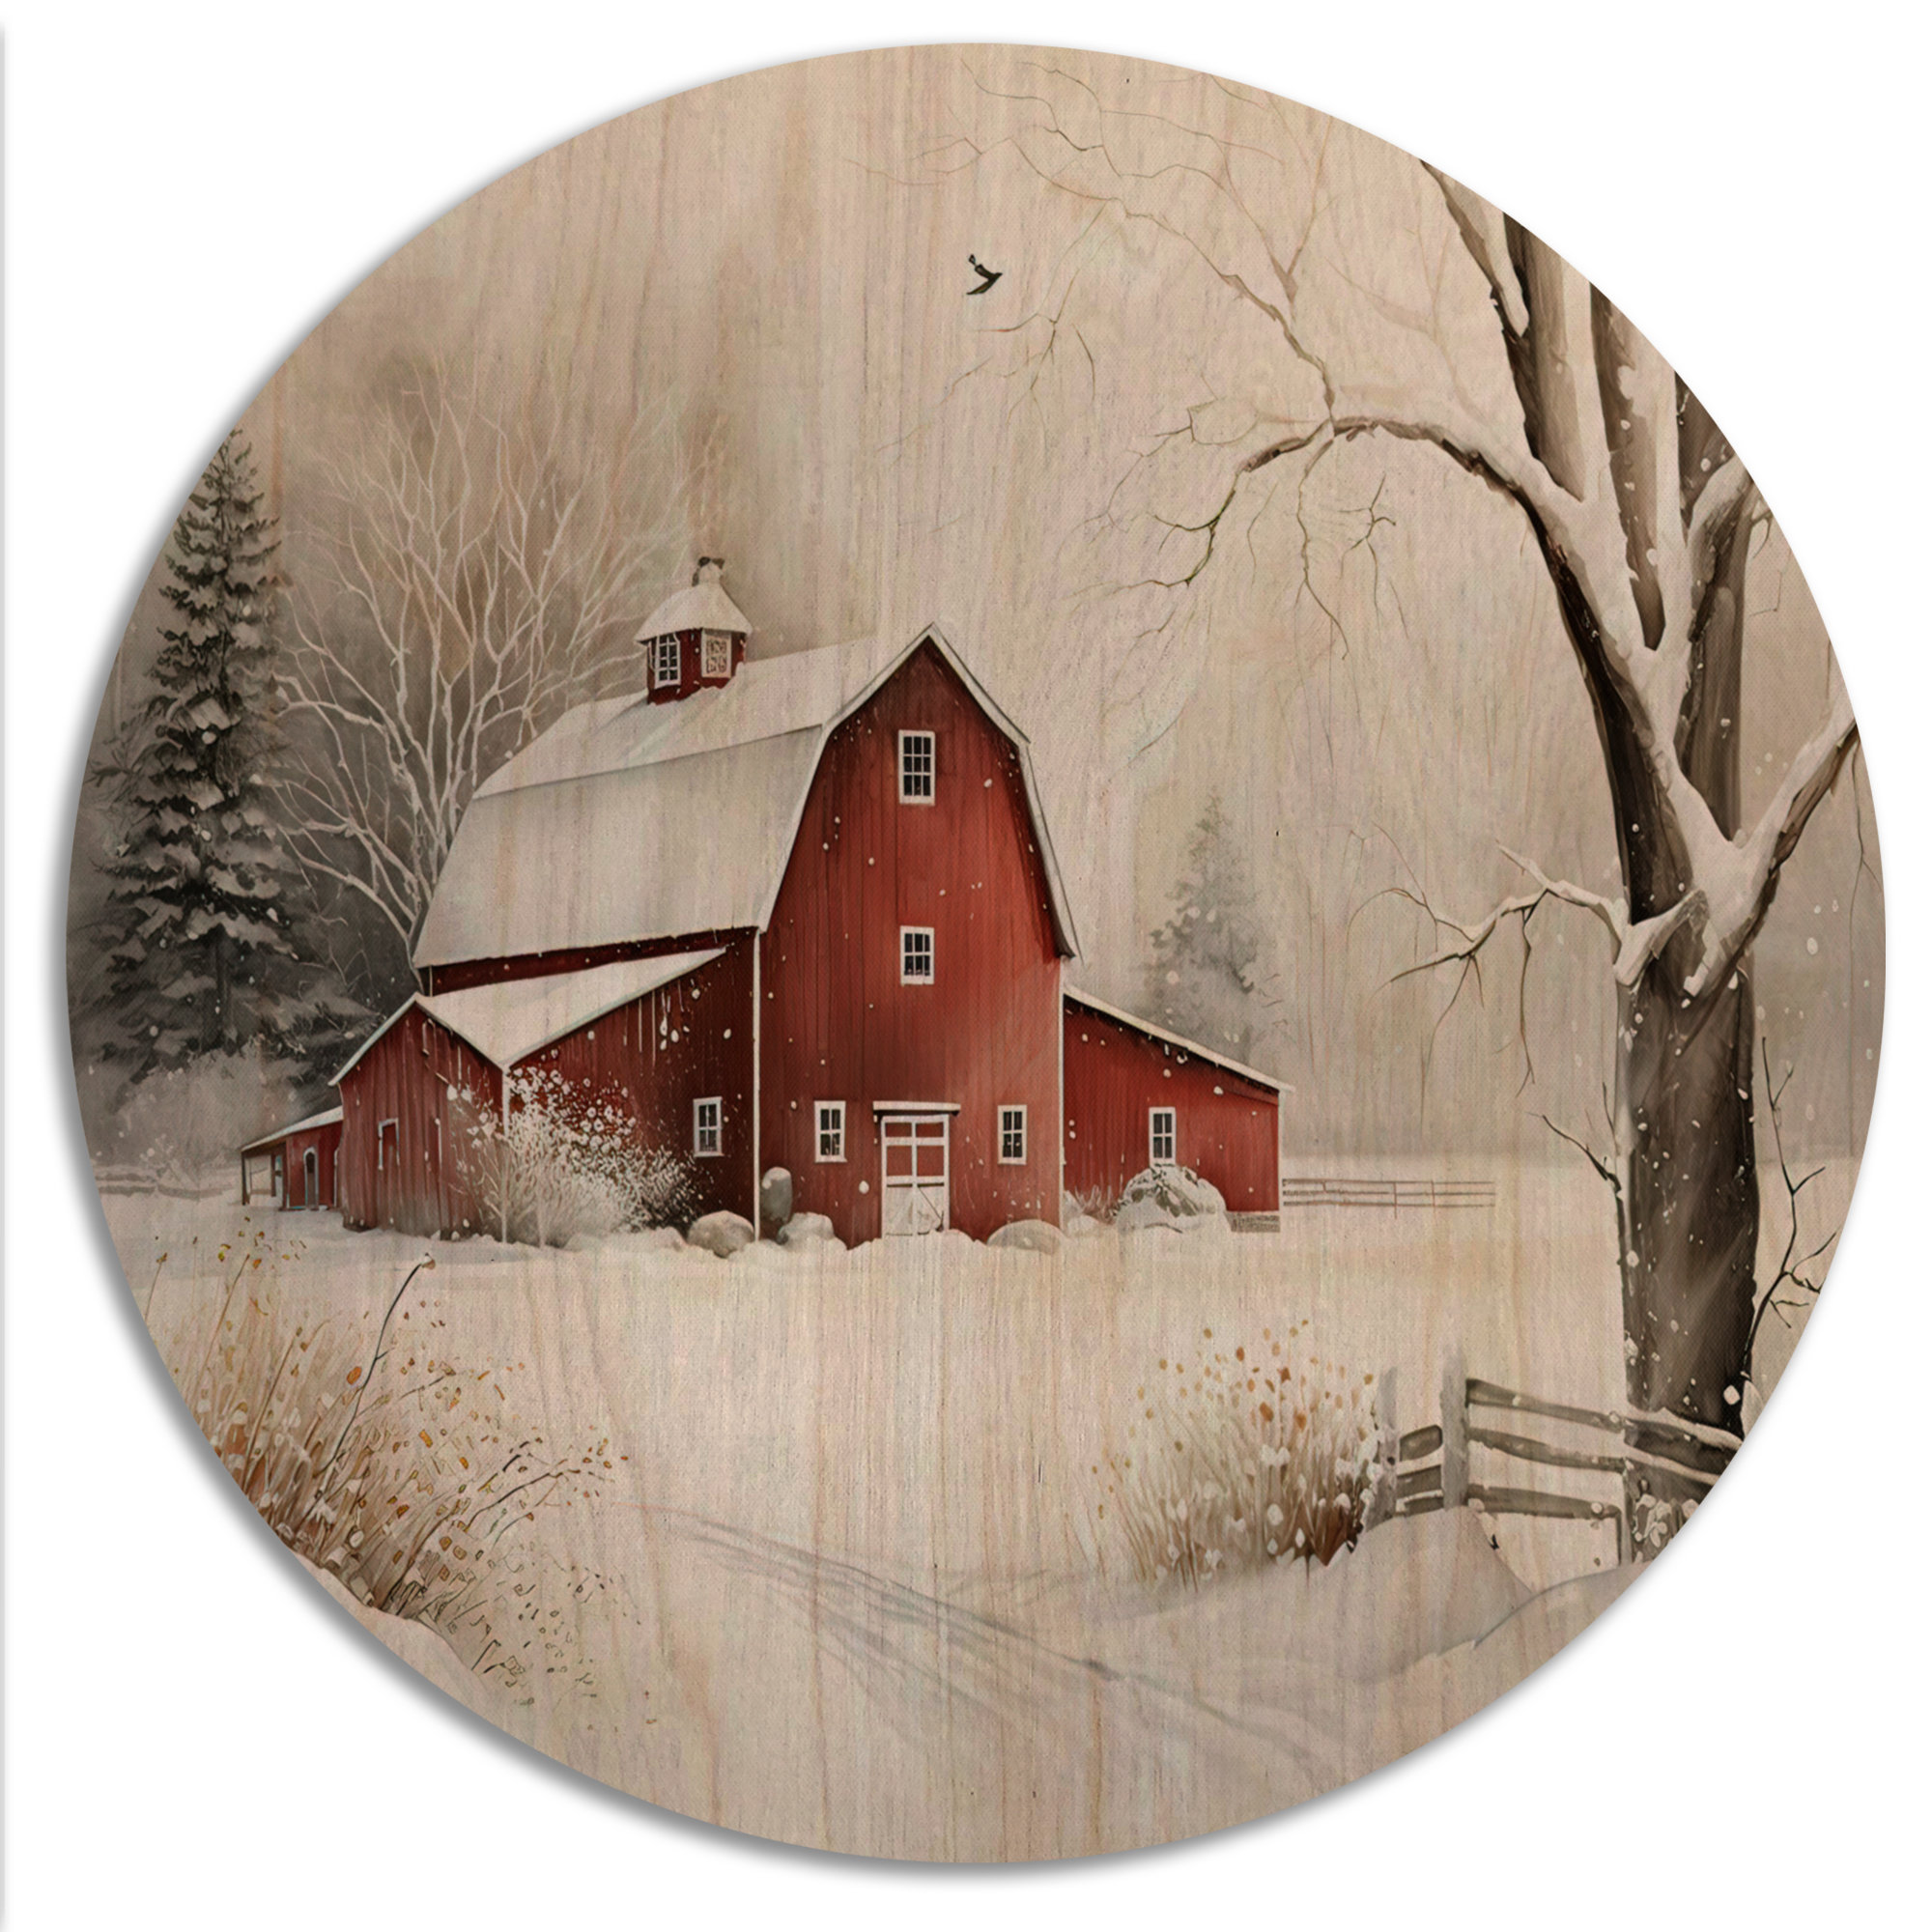 Farmhouse Christmas Red Barn Hanging Kitchen Towels